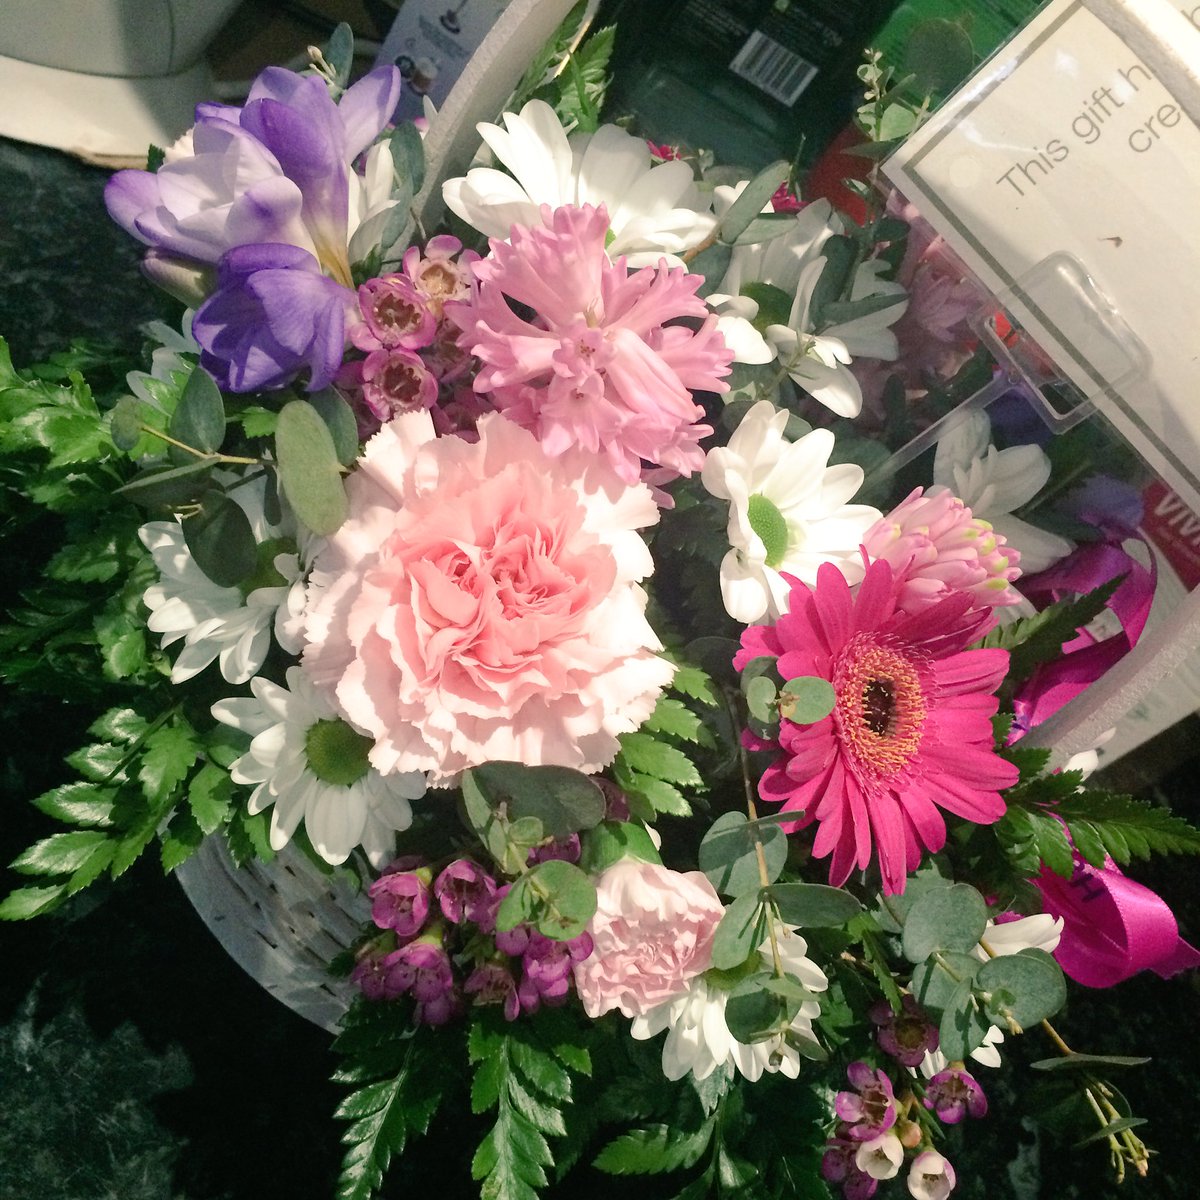 Thank you for the flowers @InterfloraUK #thepowerofflowers